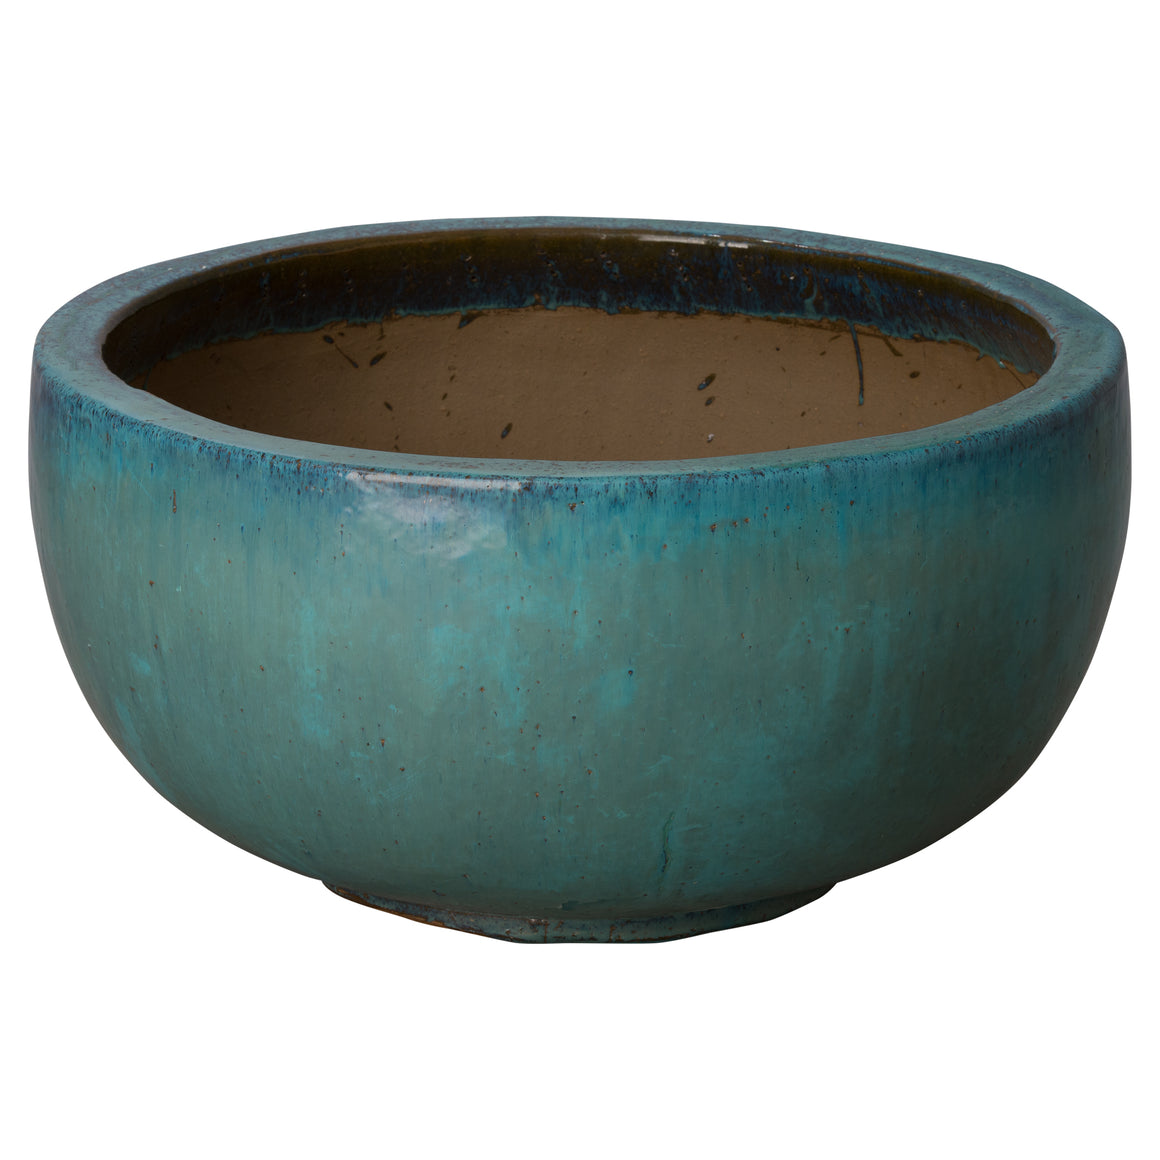 Large Shallow Planter - Gold & Teal